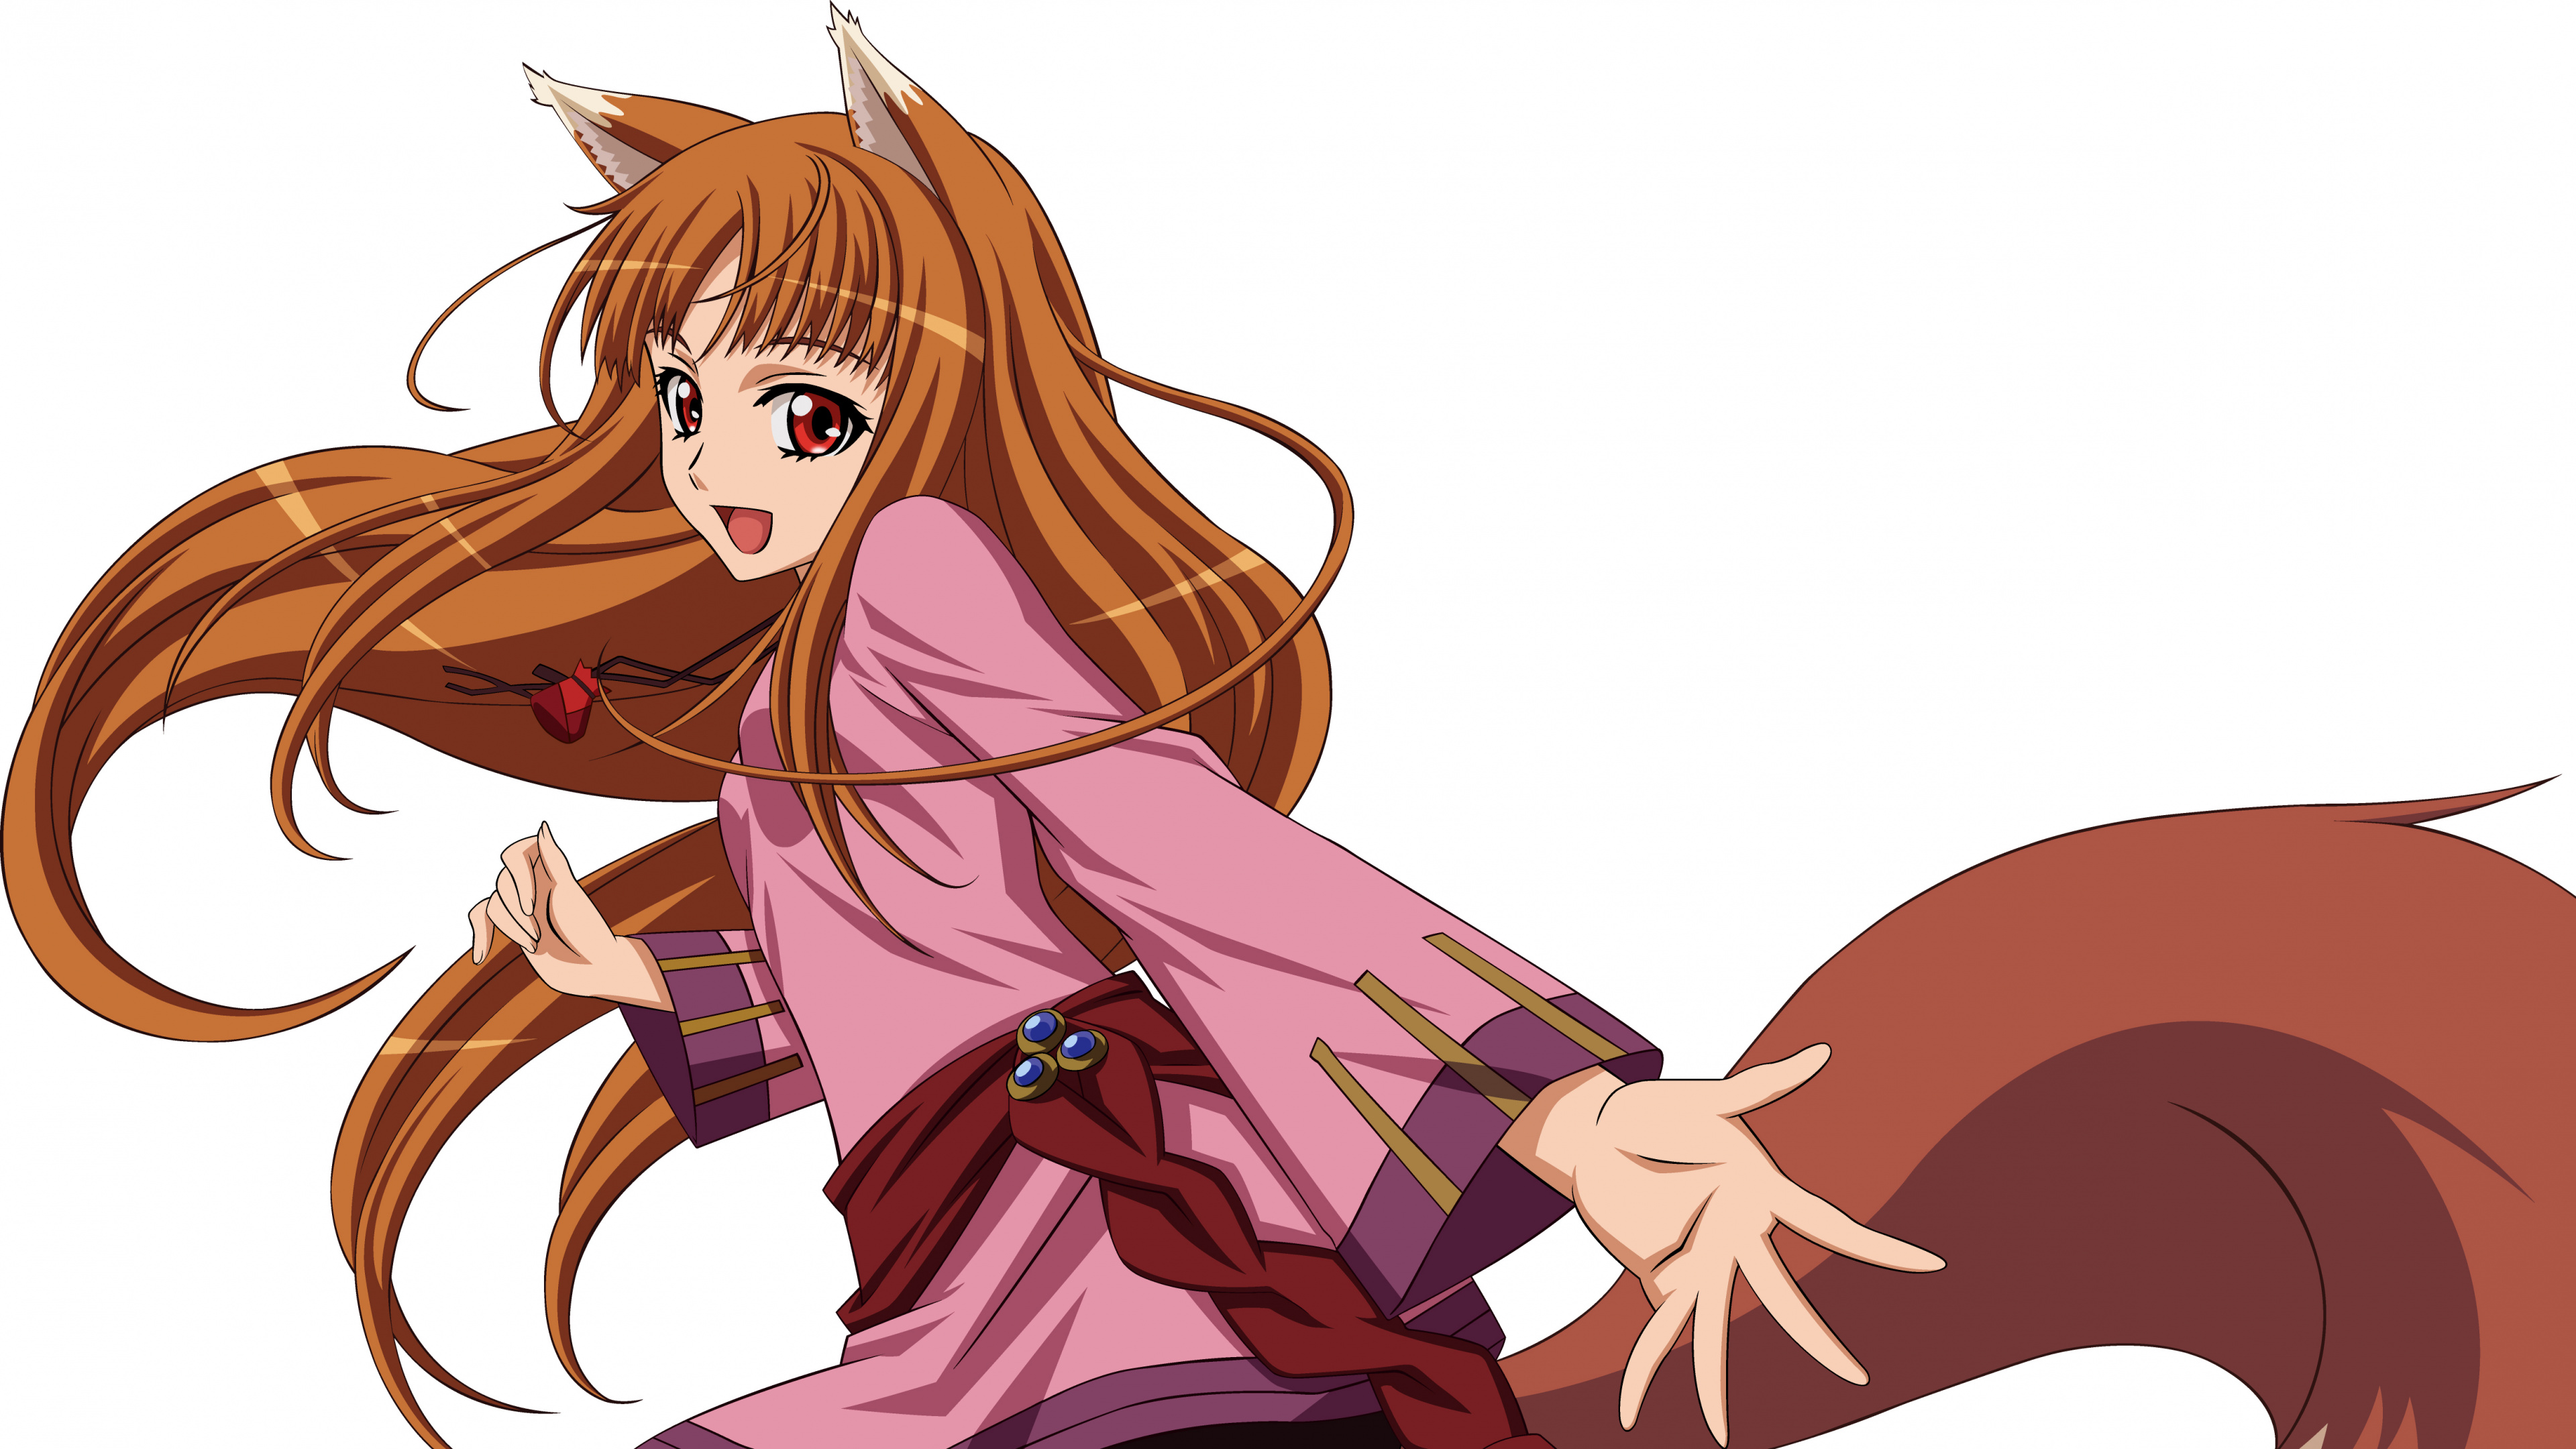 Fille Aux Cheveux Blonds en Robe Rose Personnage Anime. Wallpaper in 3840x2160 Resolution